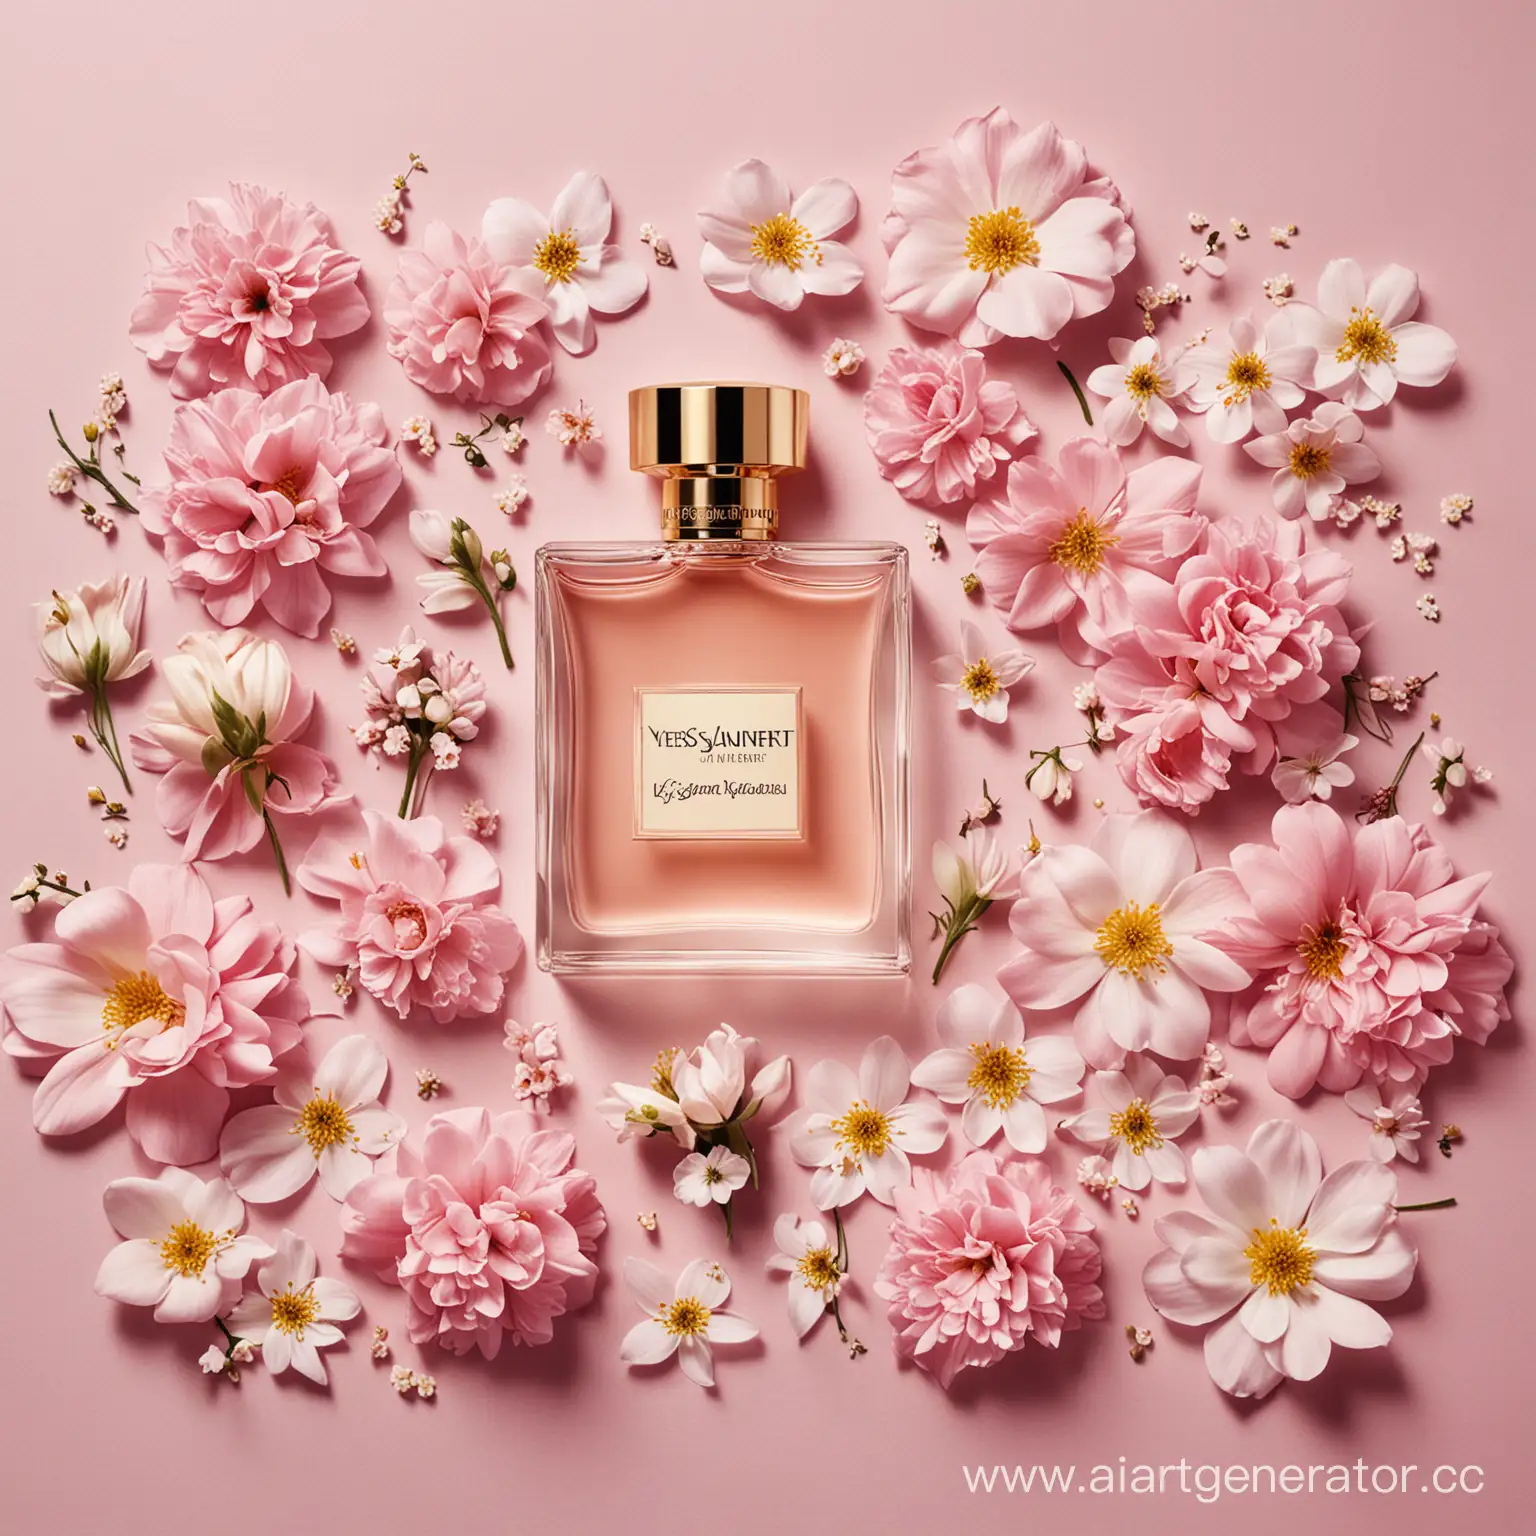 Yves-Saint-Laurent-Perfume-Collection-with-Fragrant-Flowers-and-Tenderness